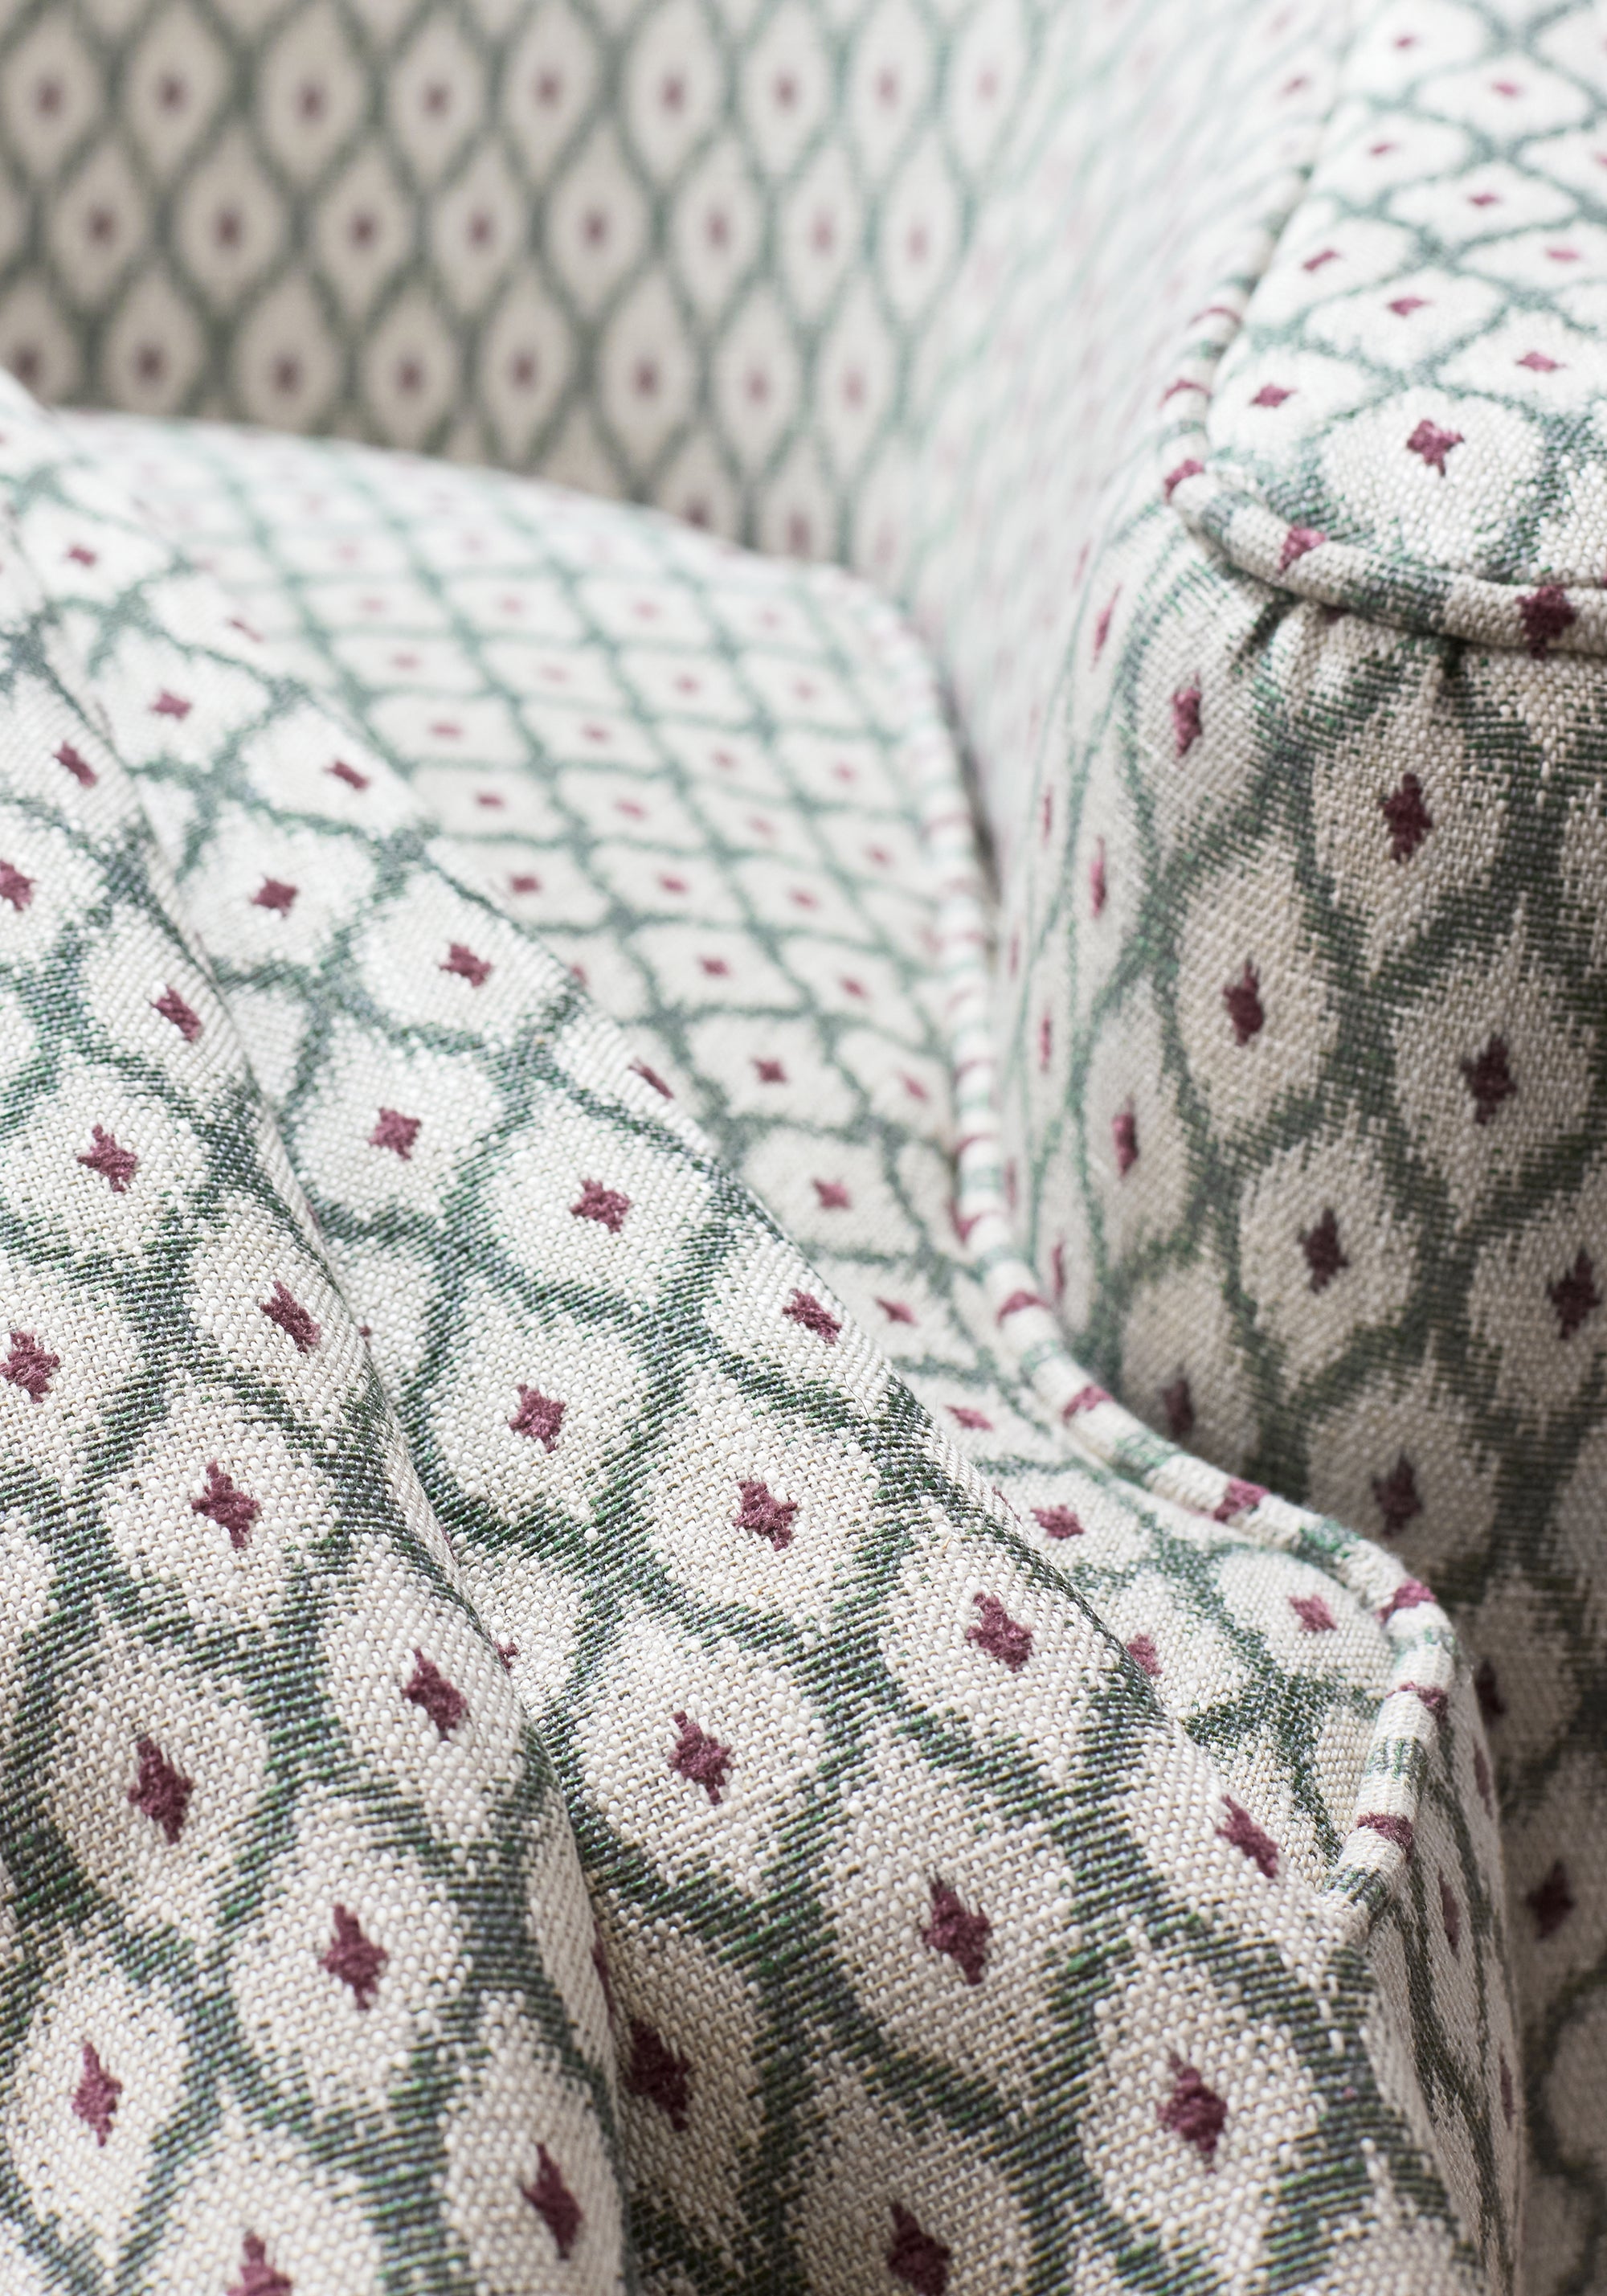 Detailed Josephine woven fabric in loden color, pattern number W81906 of the Anna French Bristol collection